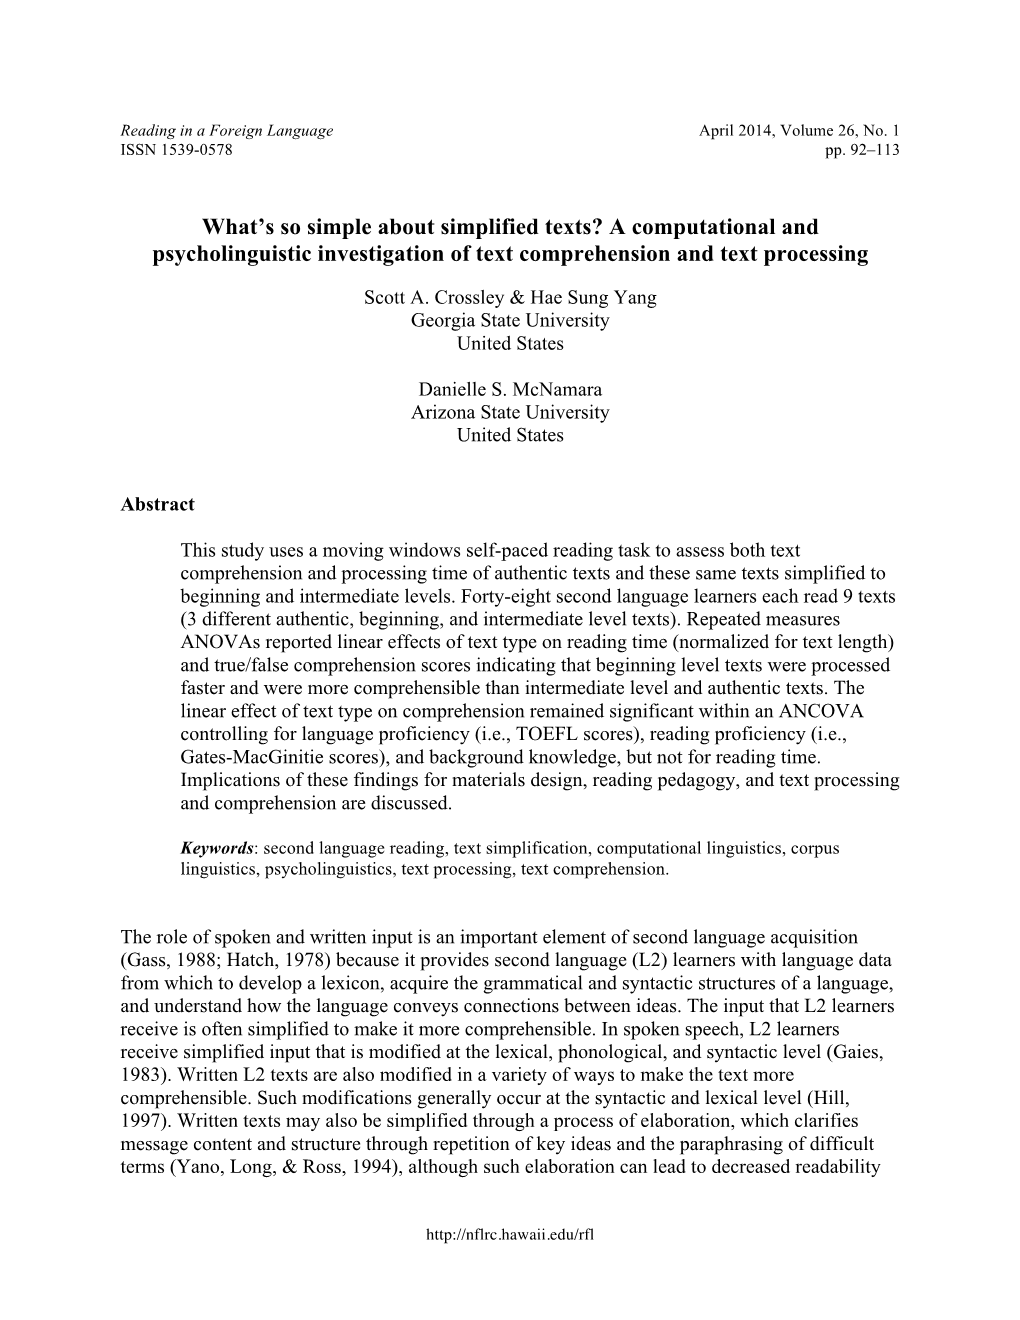 What's So Simple About Simplified Texts? a Computational and Psycholinguistic Investigation of Text Comprehension and Text